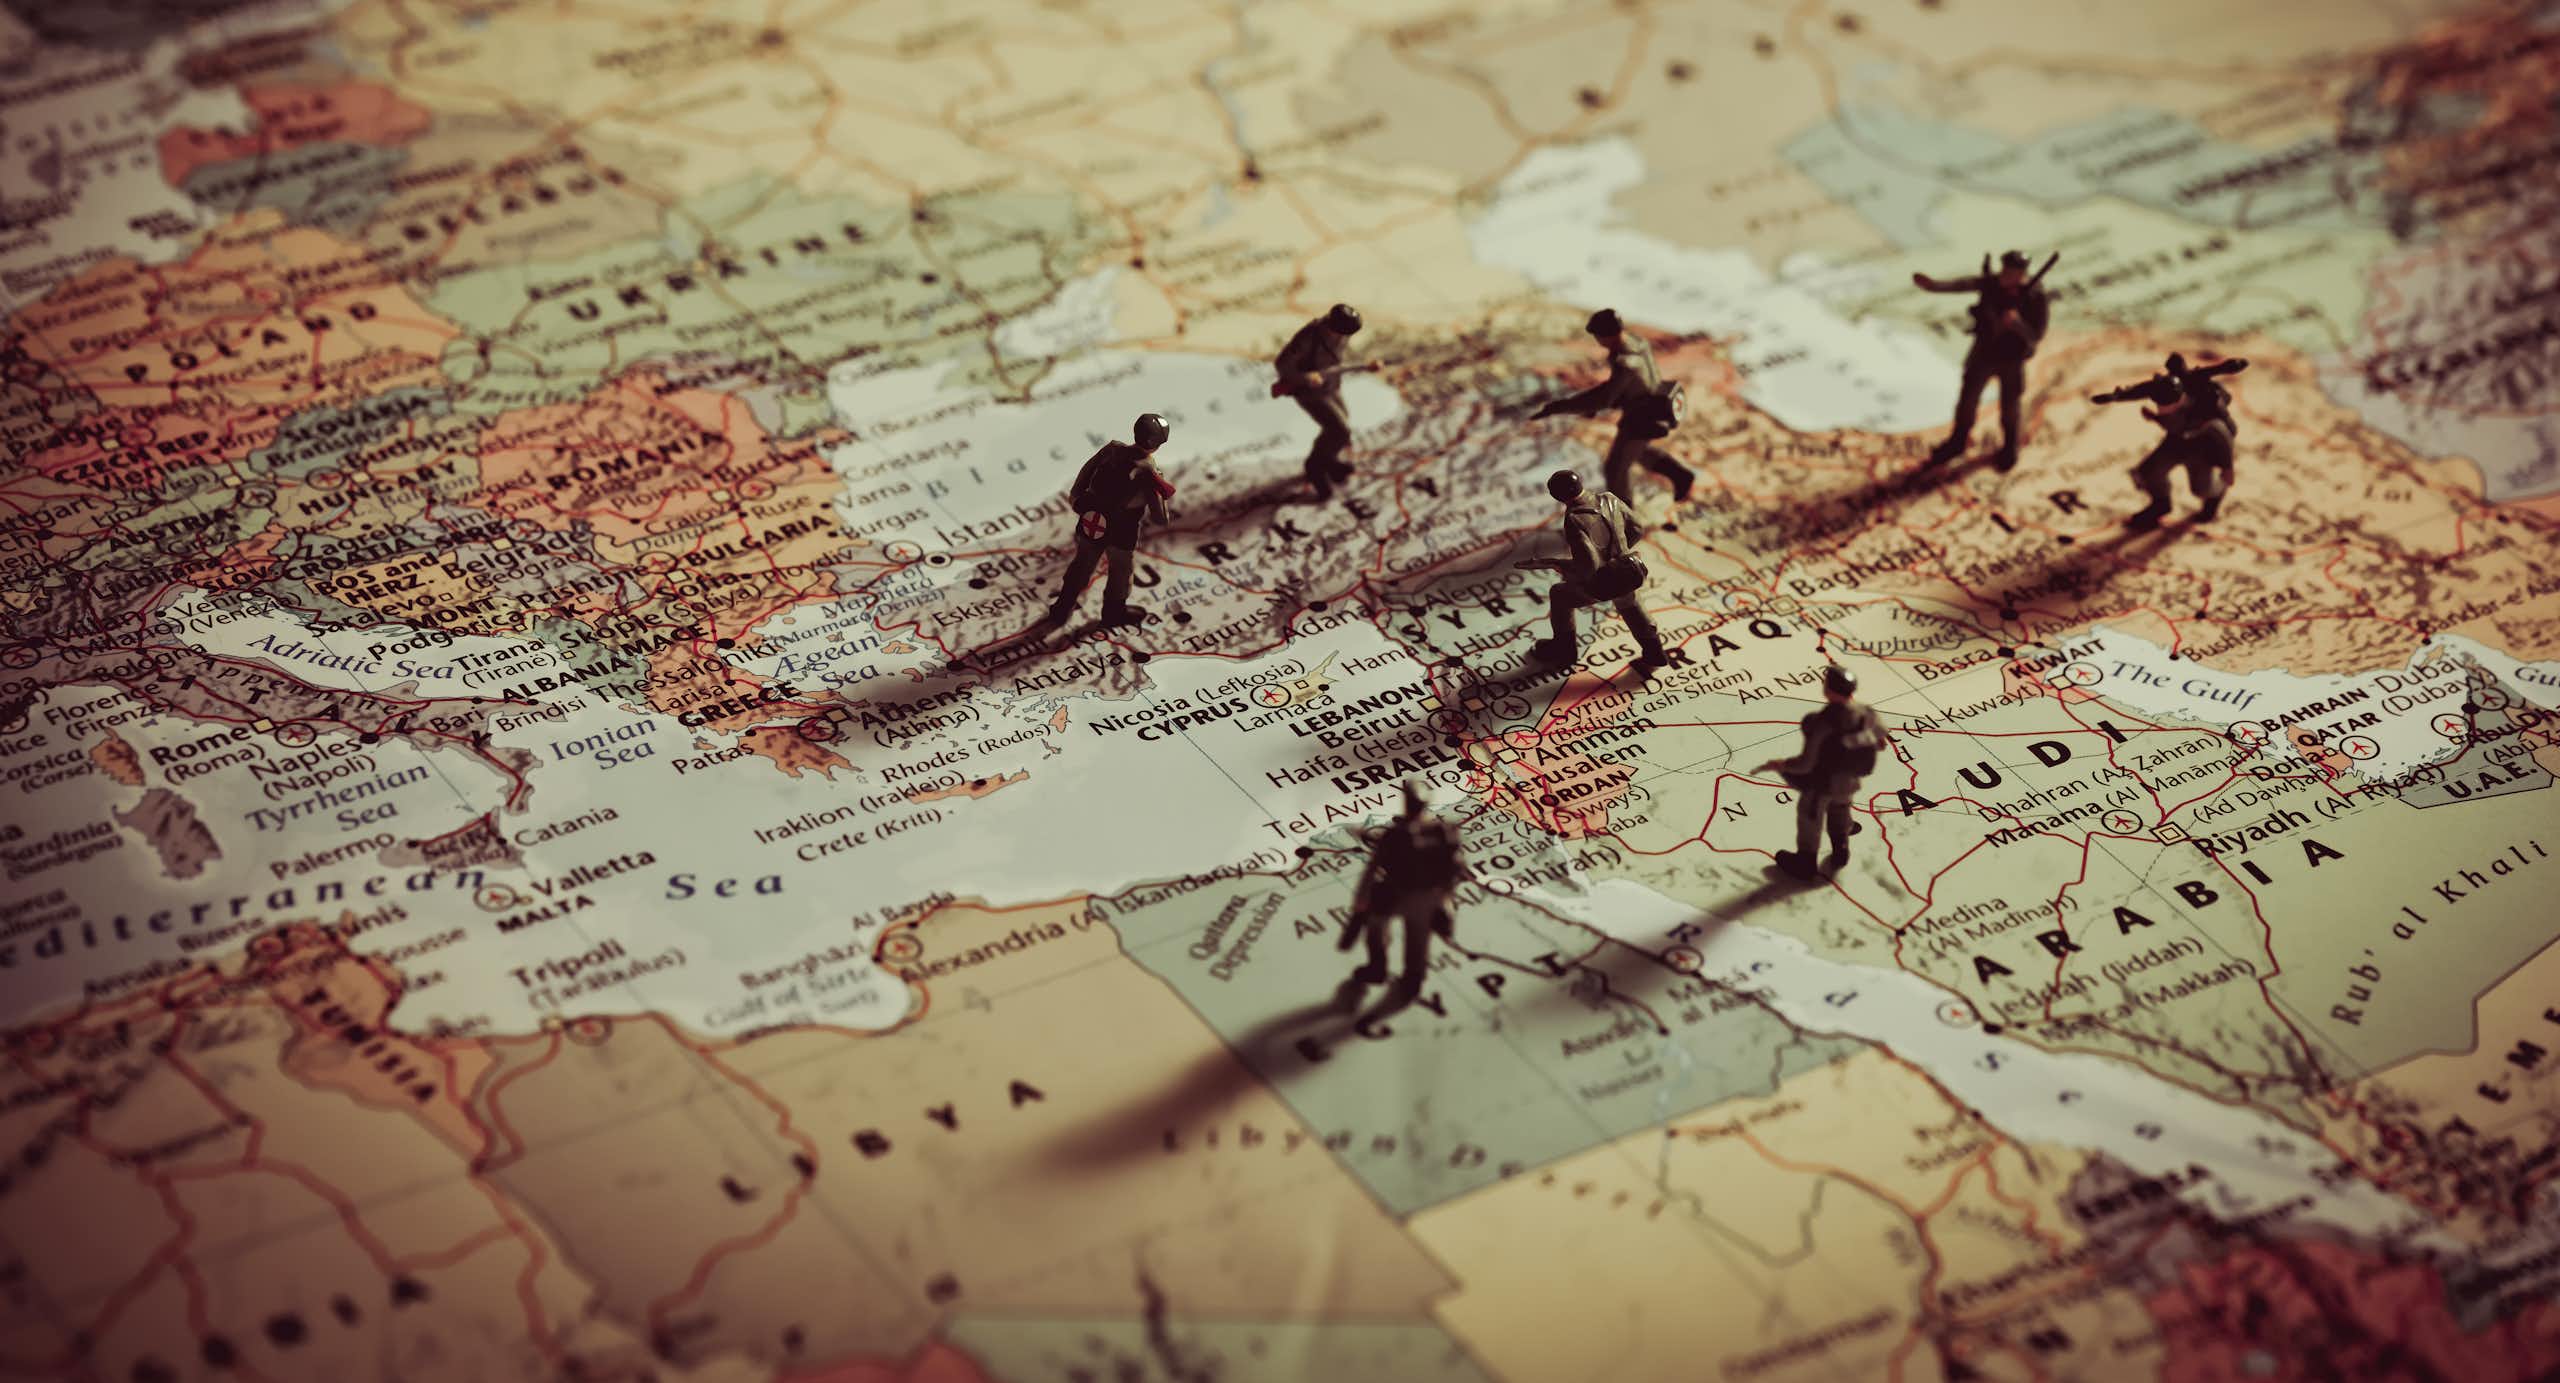 Toy soldiers positioned over the top of a map of Europe and the Middle East.